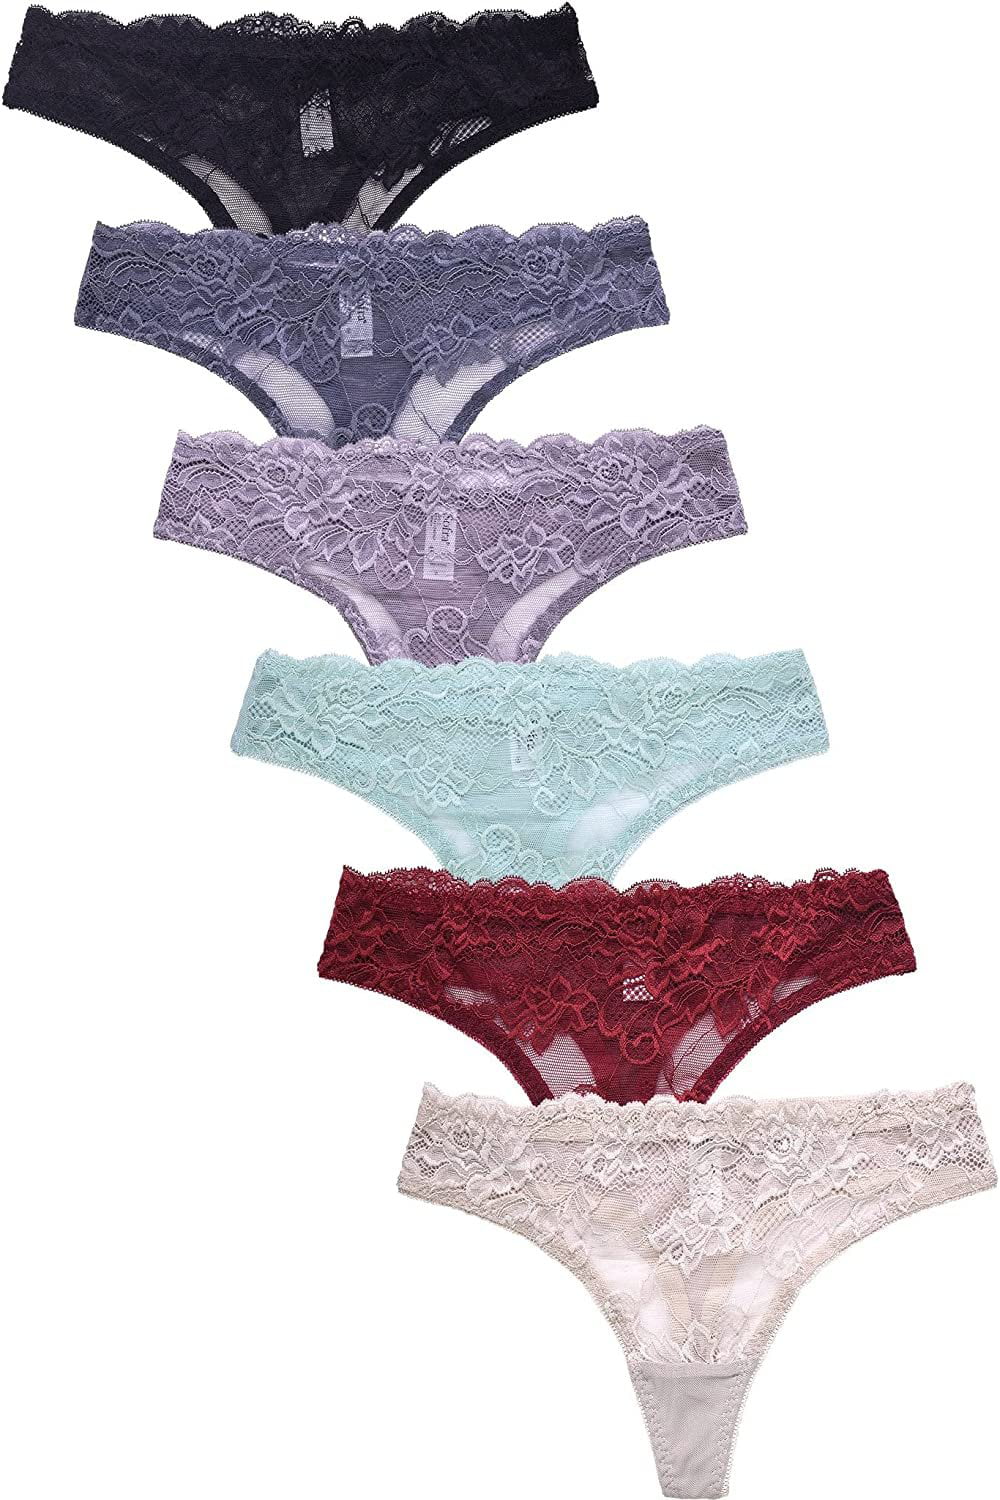 Women's Soft Cotton Lace No Show Thong Panty Pack of 12 - Various Styles 